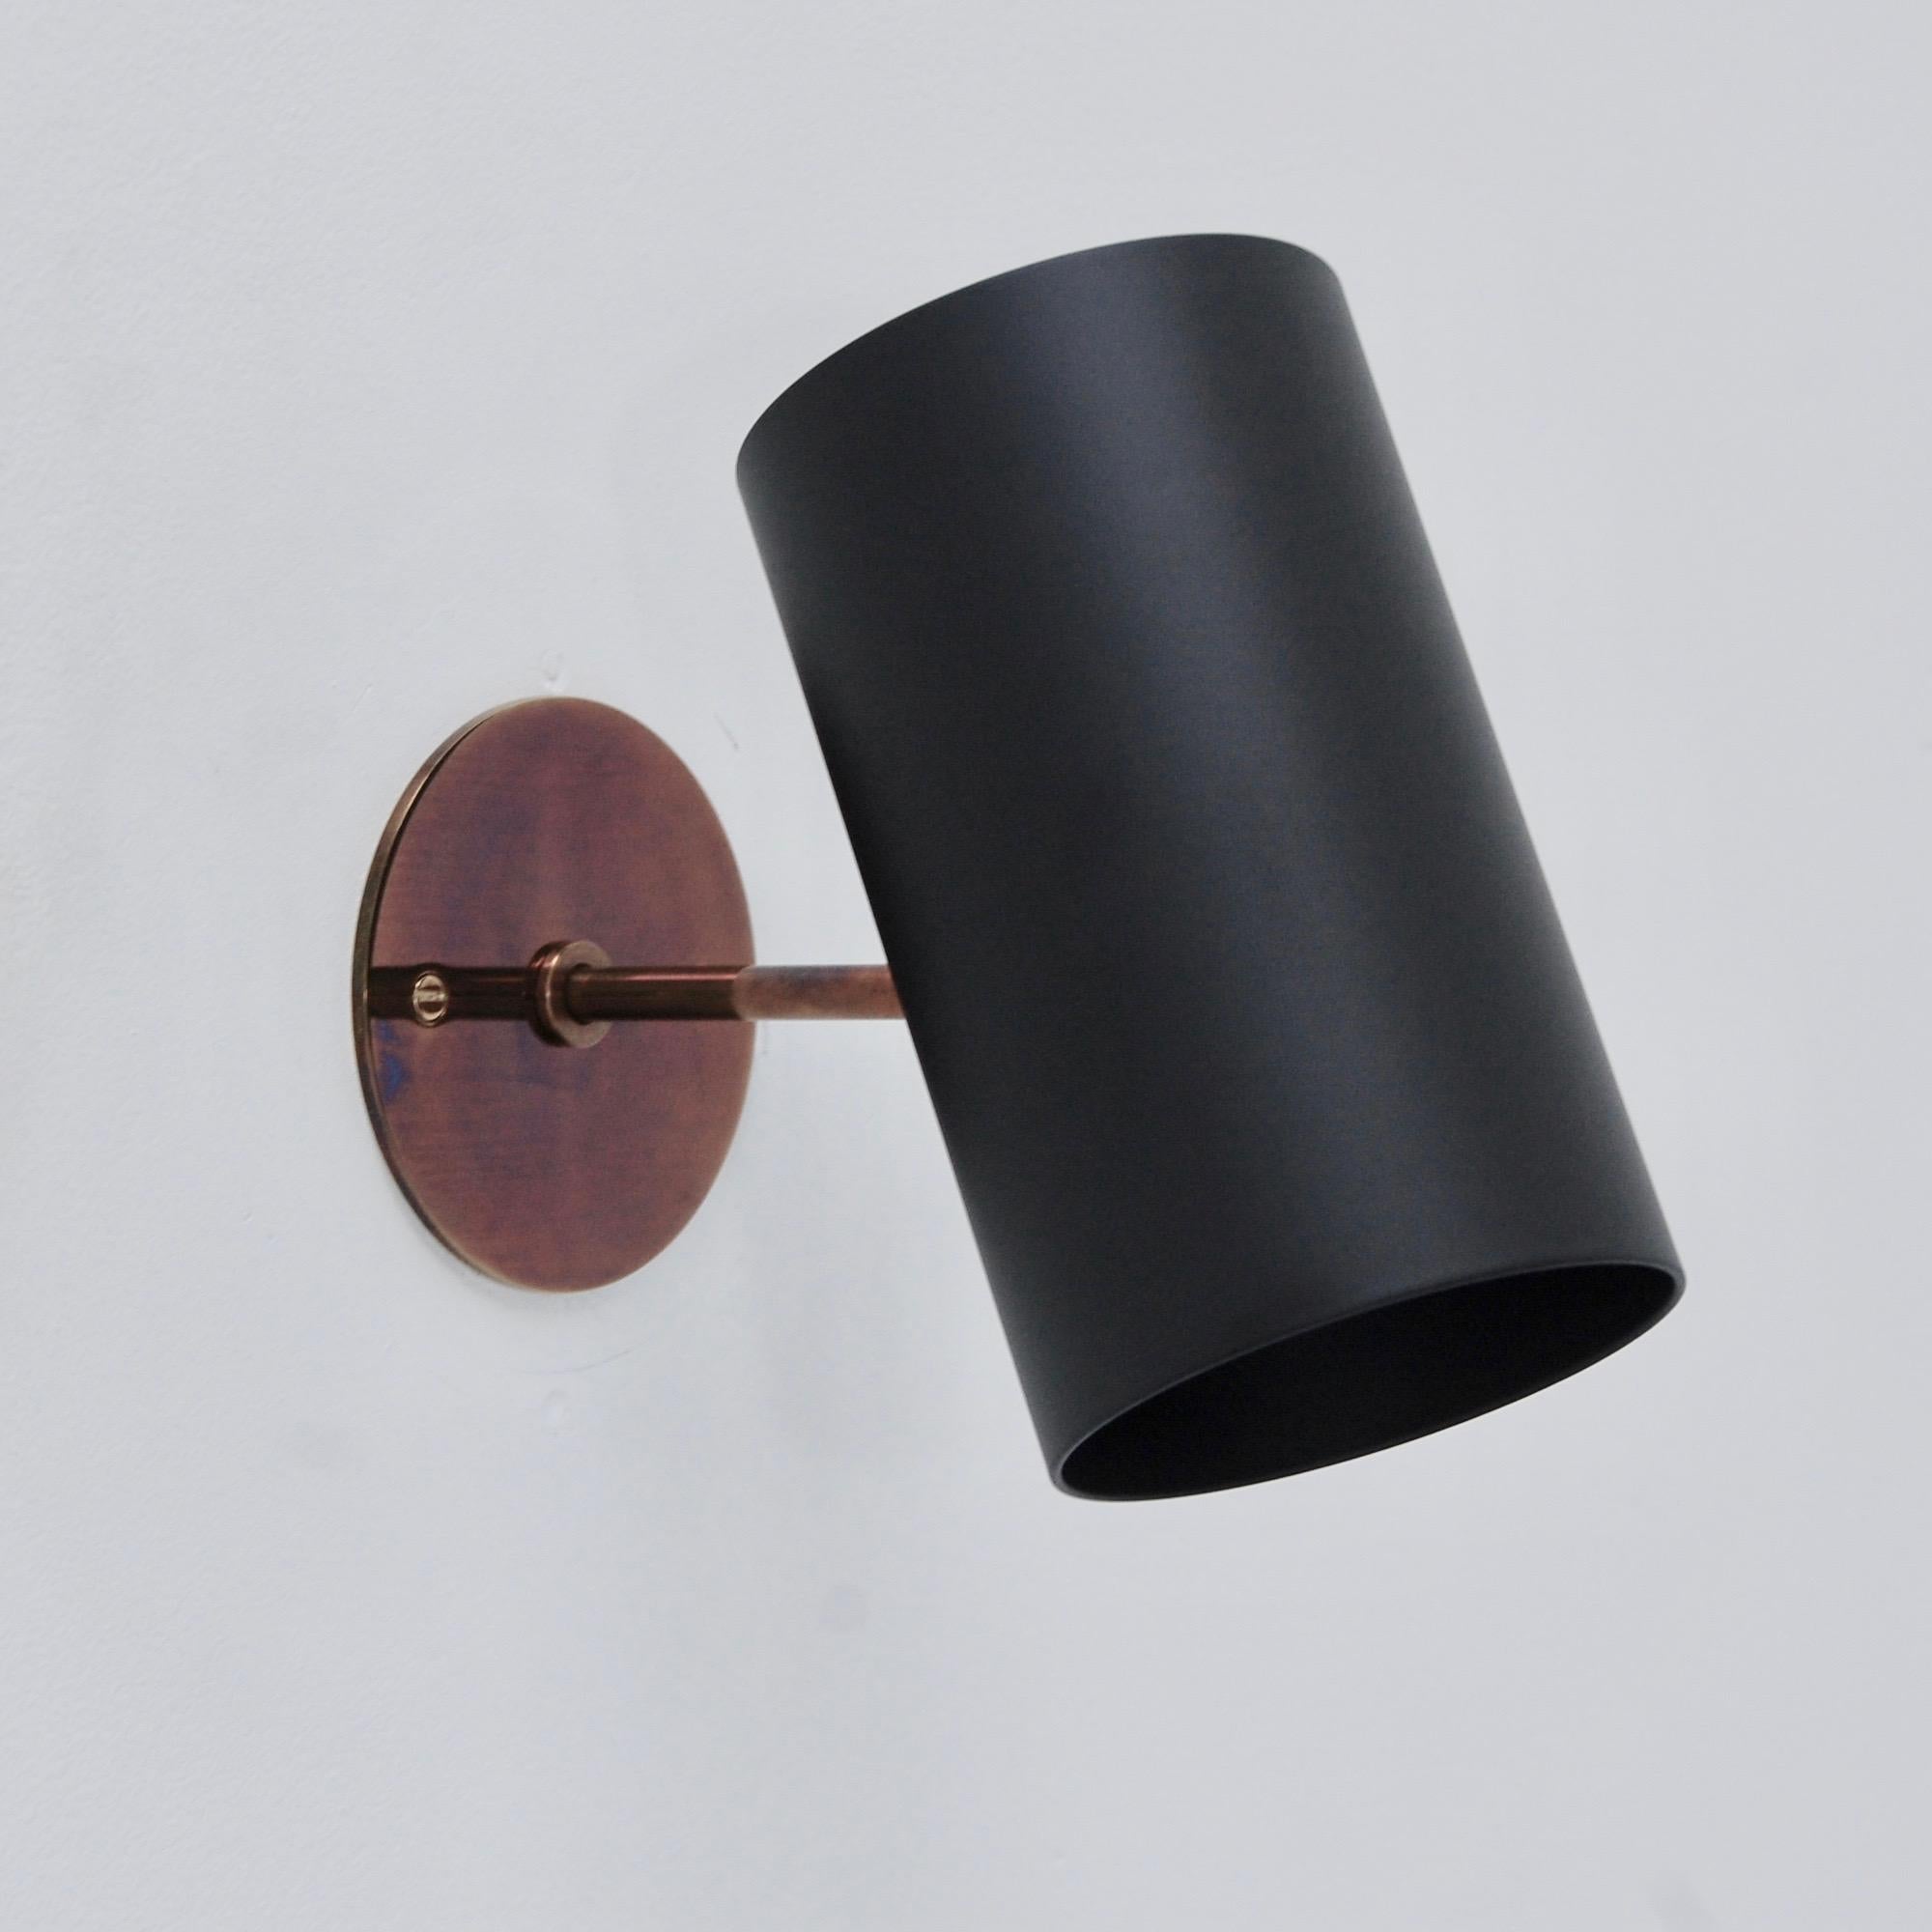 Part of our Lumfardo Luminaires contemporary collection, this black and brass LUbular sconce is a Directional reading sconce in a patina brass and painted aluminum finish. Single E26 medium based socket per sconce. Maximum wattage 75 watts per